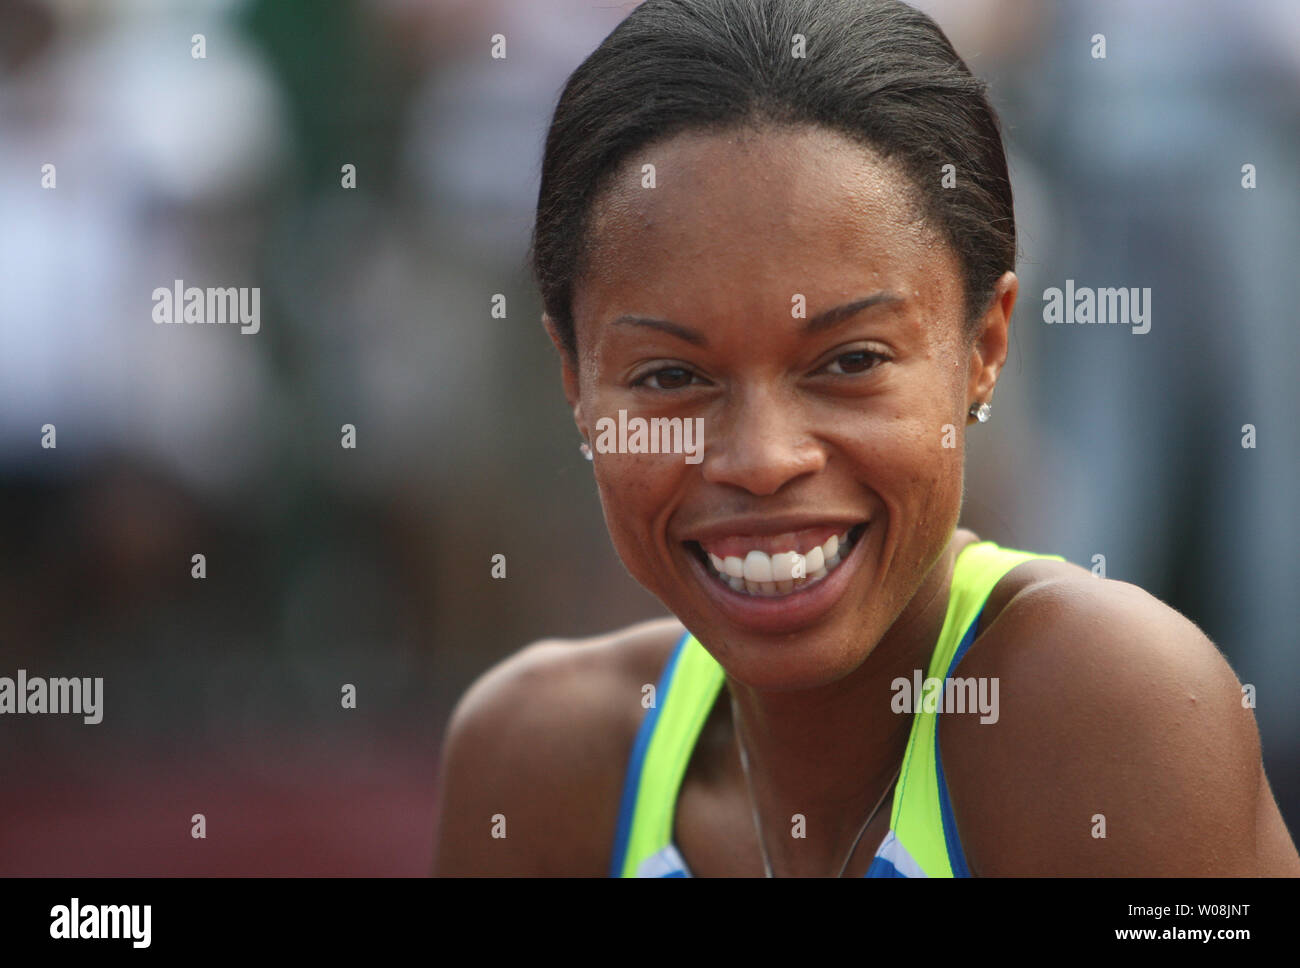 U.S. sprinter Muna Lee grins after taking first place in the finals of the 100 meters at the USA Track and Field trials in Eugene Oregon on June 28, 2008.    (UPI Photo/Terry Schmitt) Stock Photo